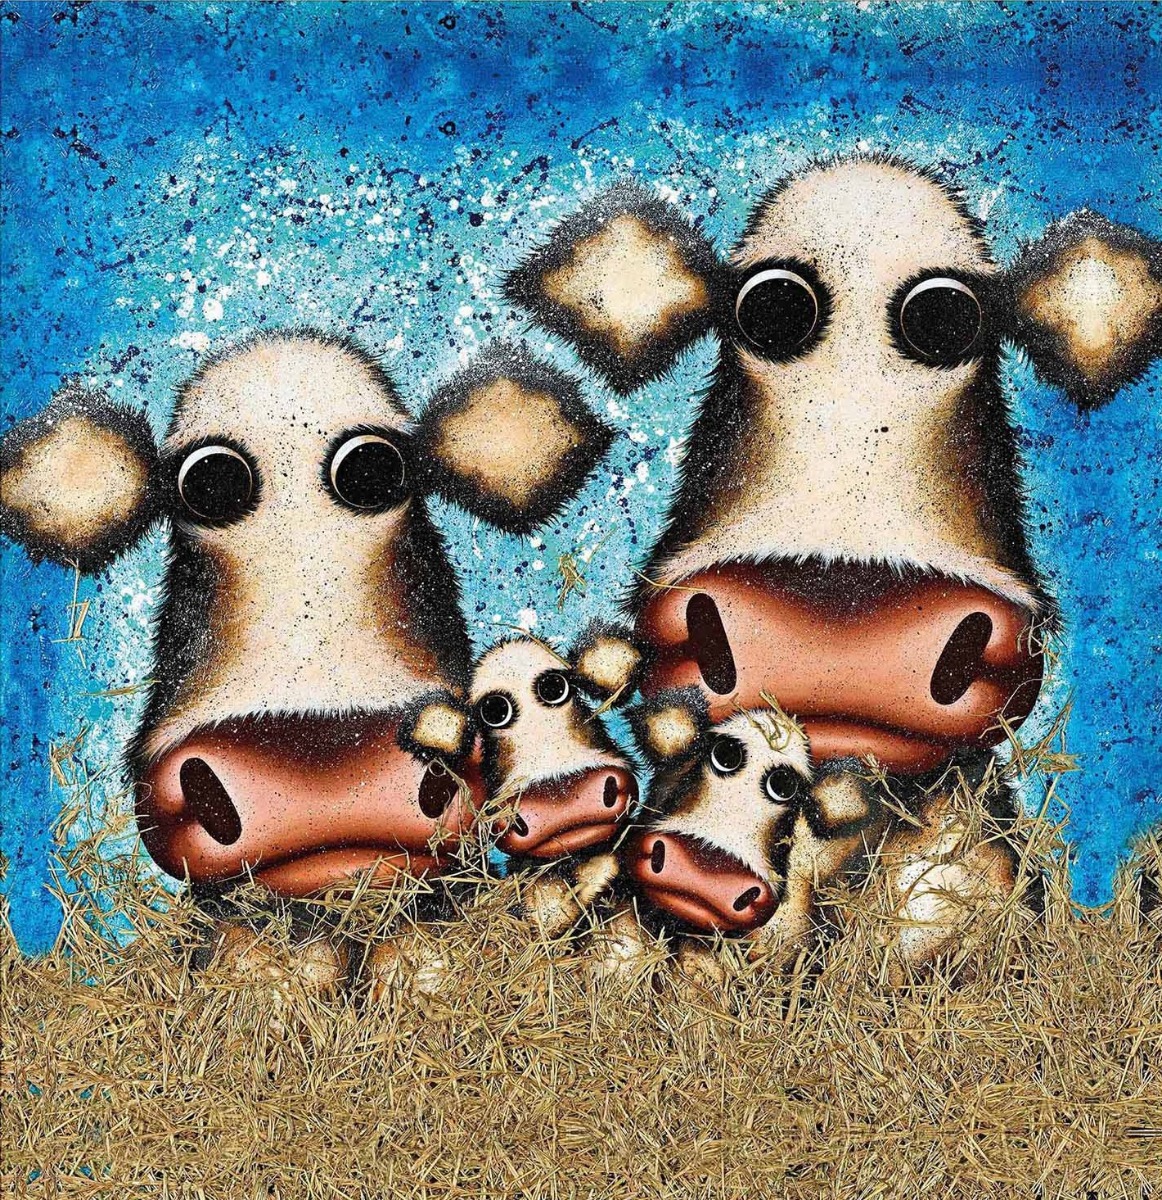 Snuggle Up, It's Fresian Cold! by Caroline Shotton, Humour | Cow | Family